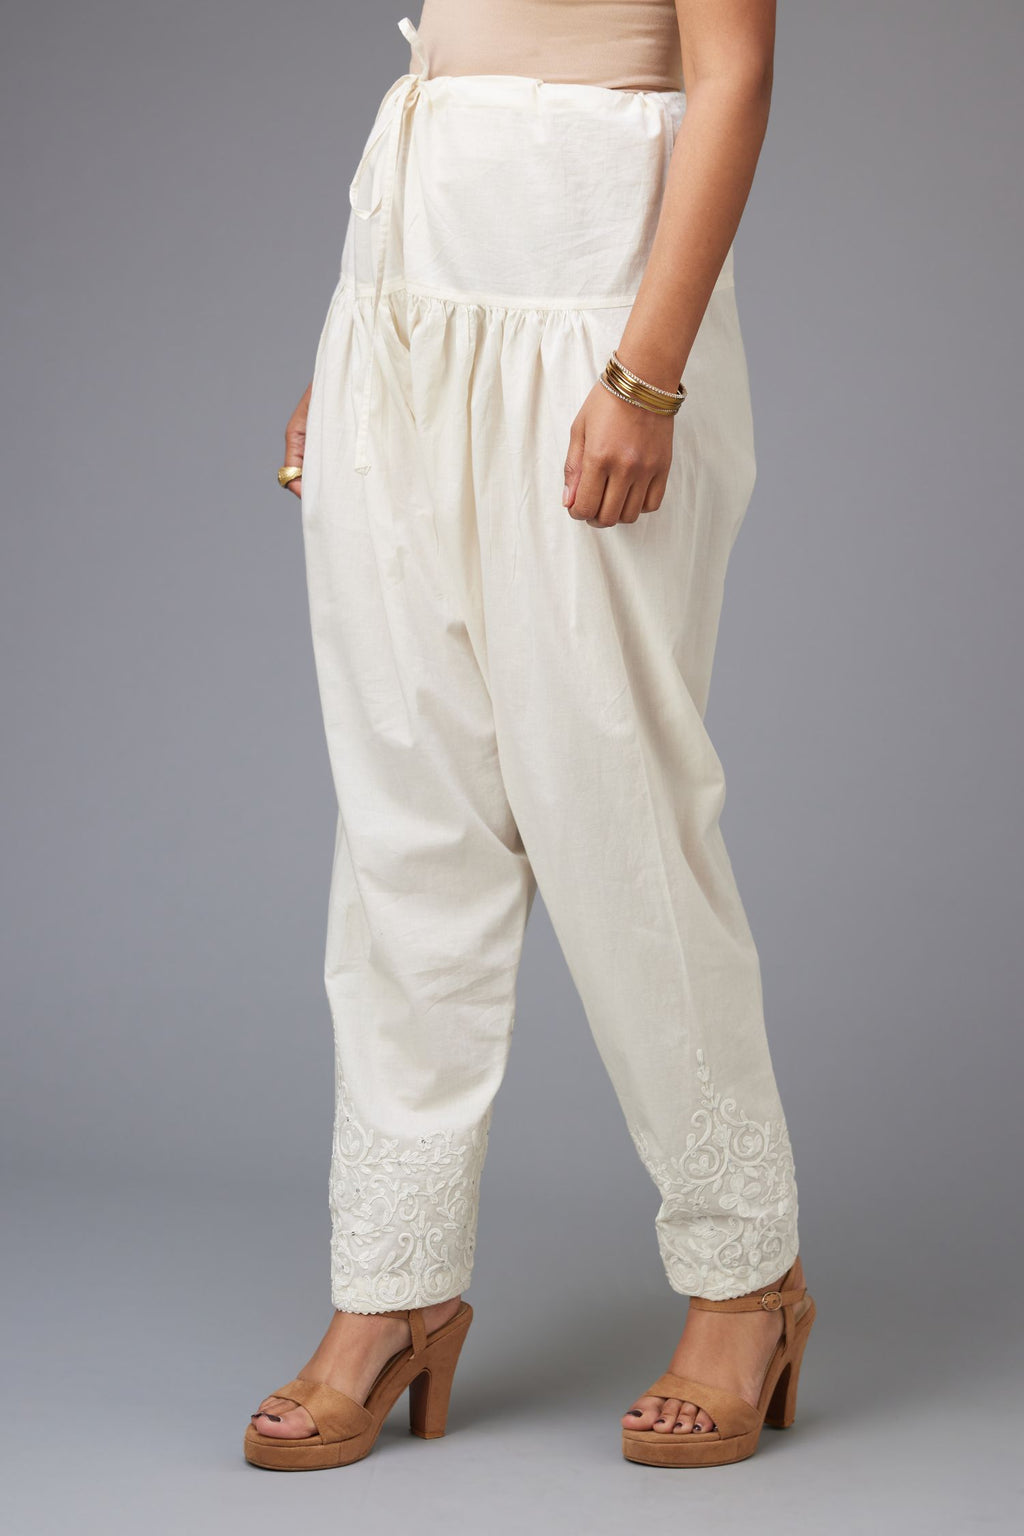 Off-white cotton narrow salwar with dori embroidery at hem.